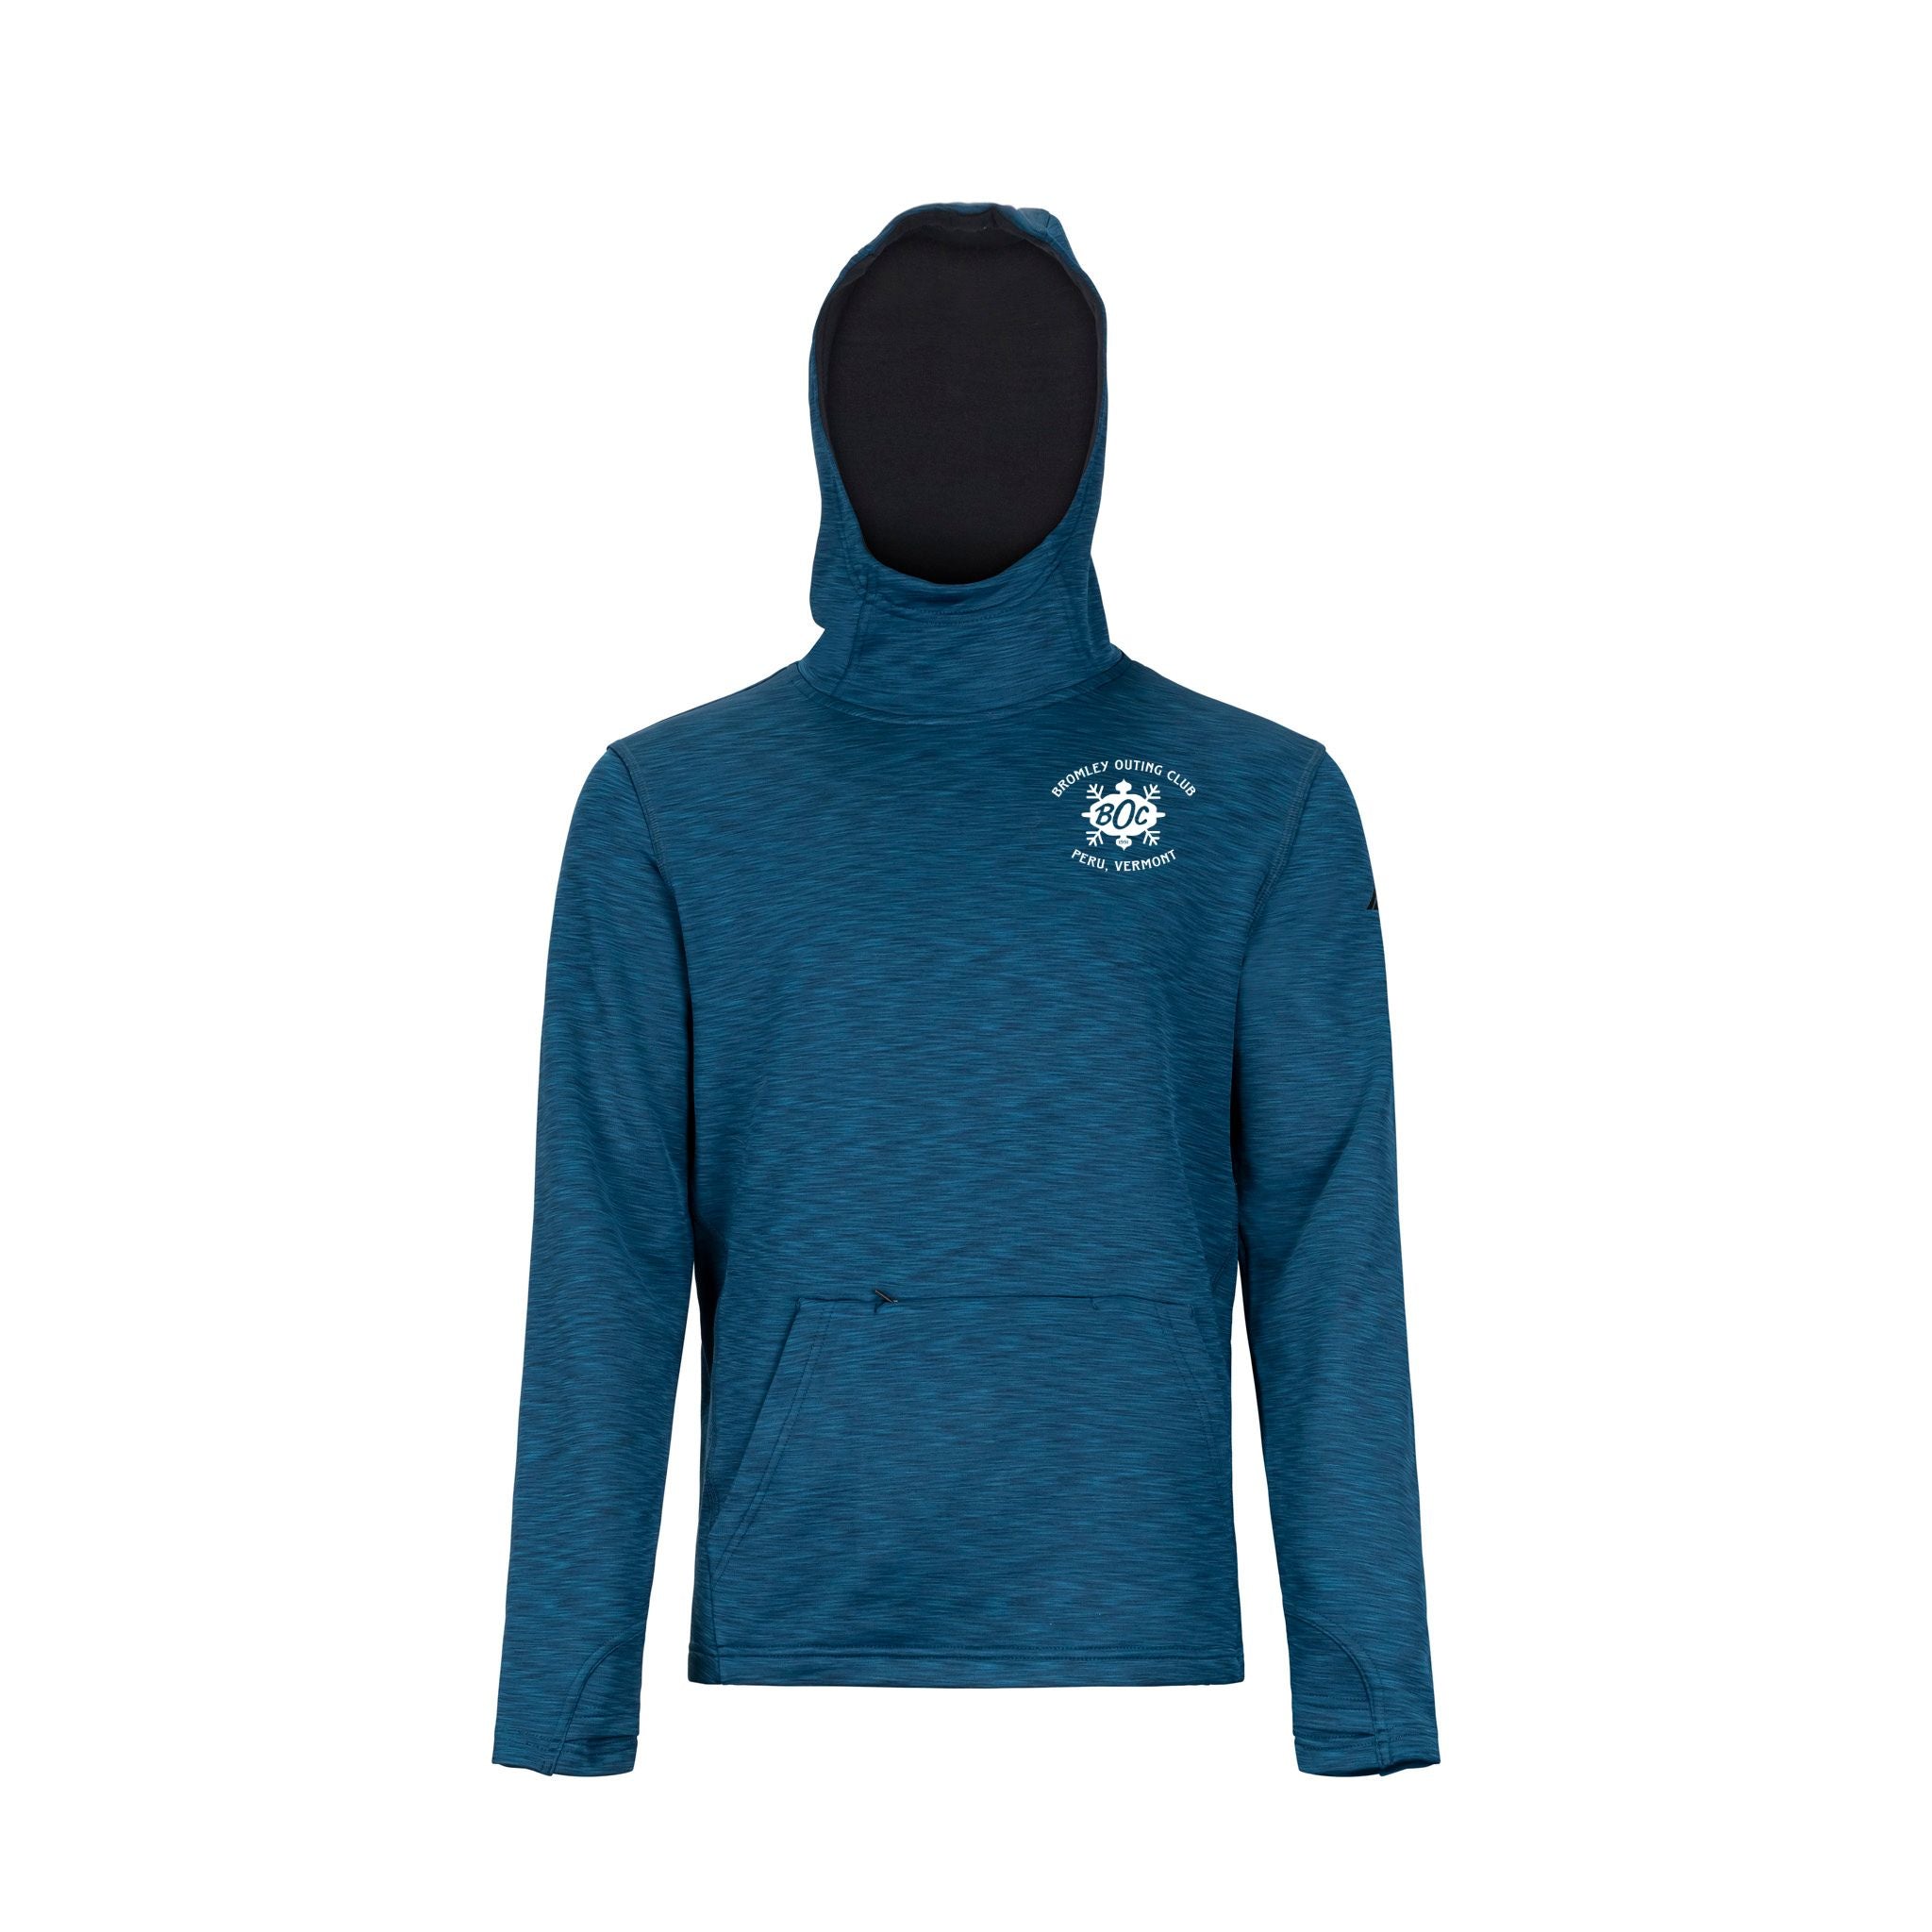 Men's Benchmark Hoodie - Bromley Outing Cub